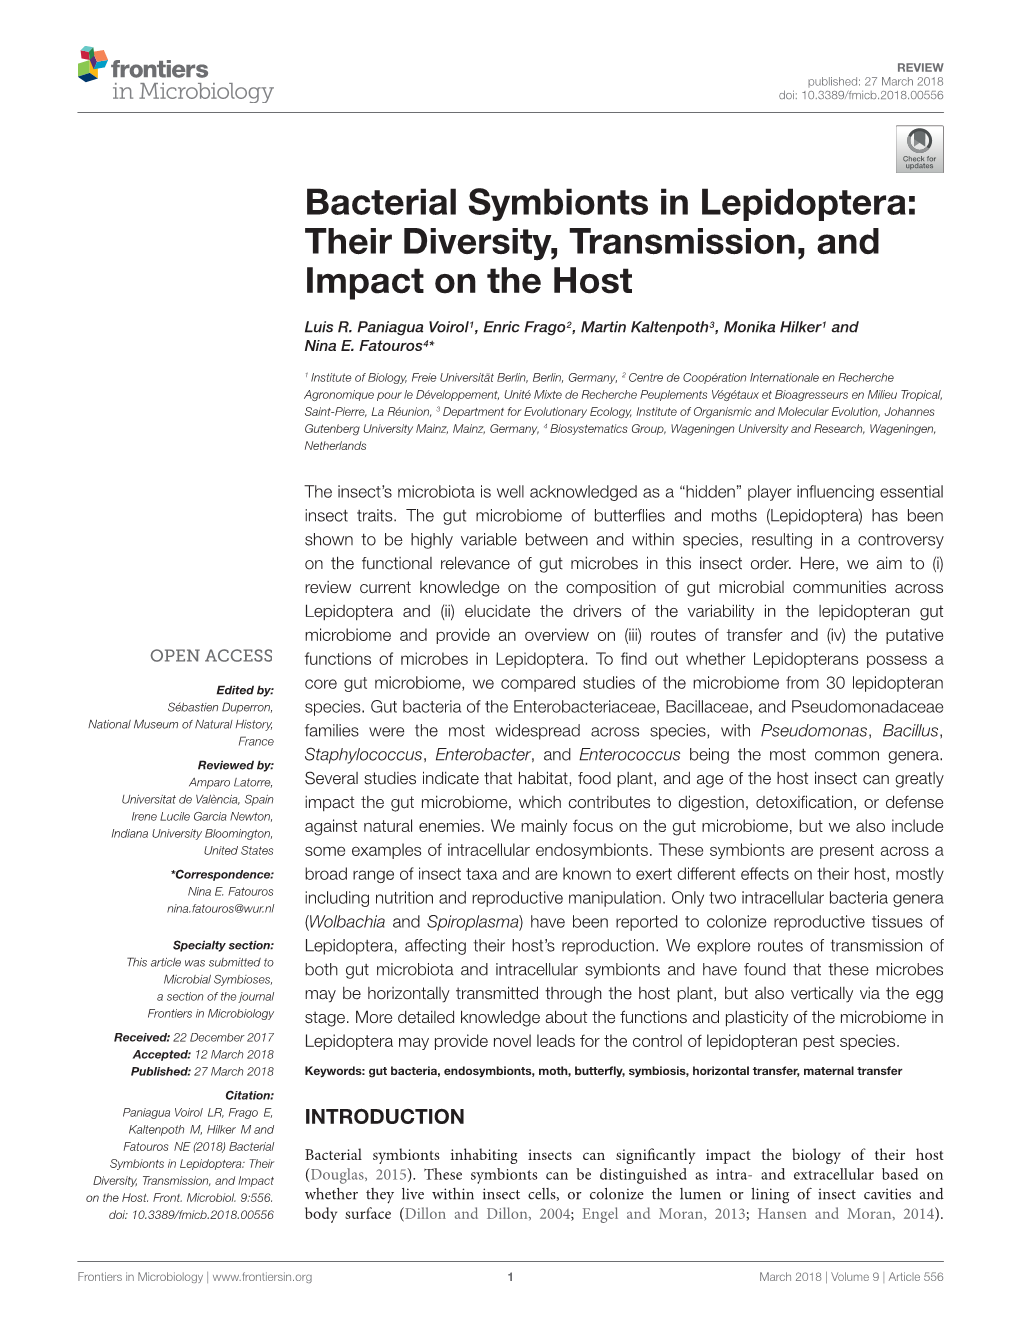 Bacterial Symbionts in Lepidoptera: Their Diversity, Transmission, and Impact on the Host